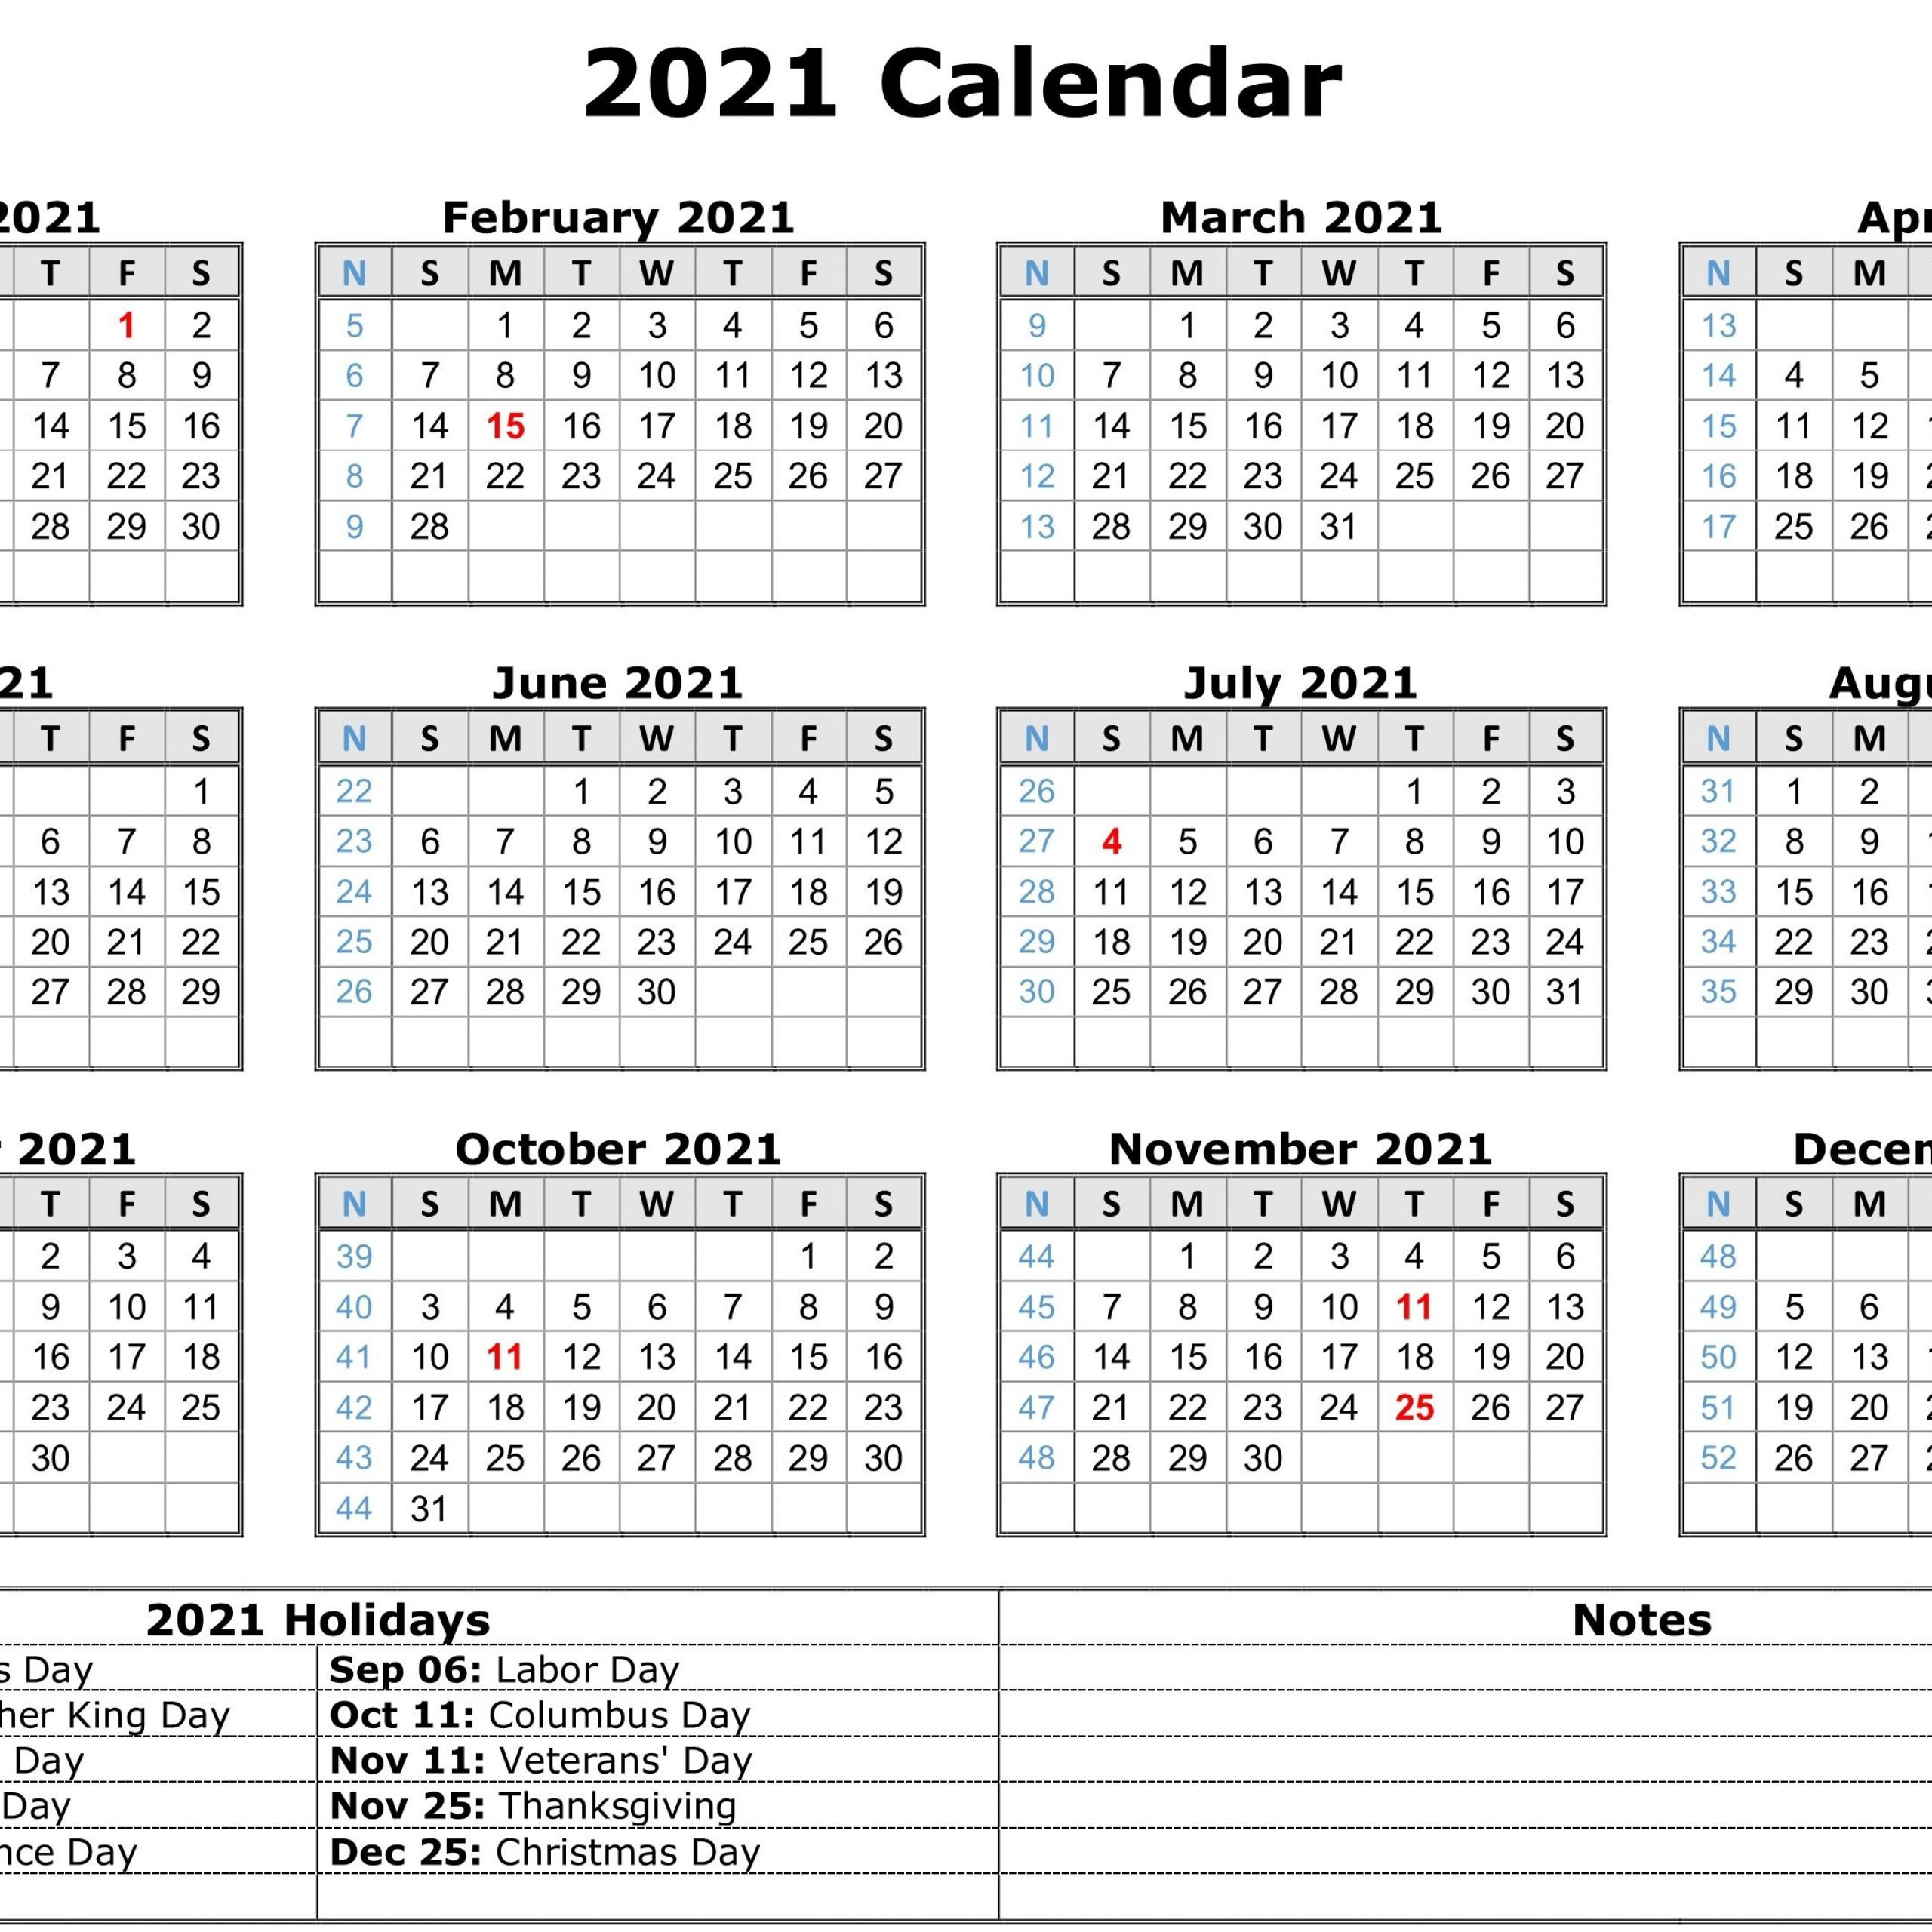 Free Print 2021 Calendars Without Downloading